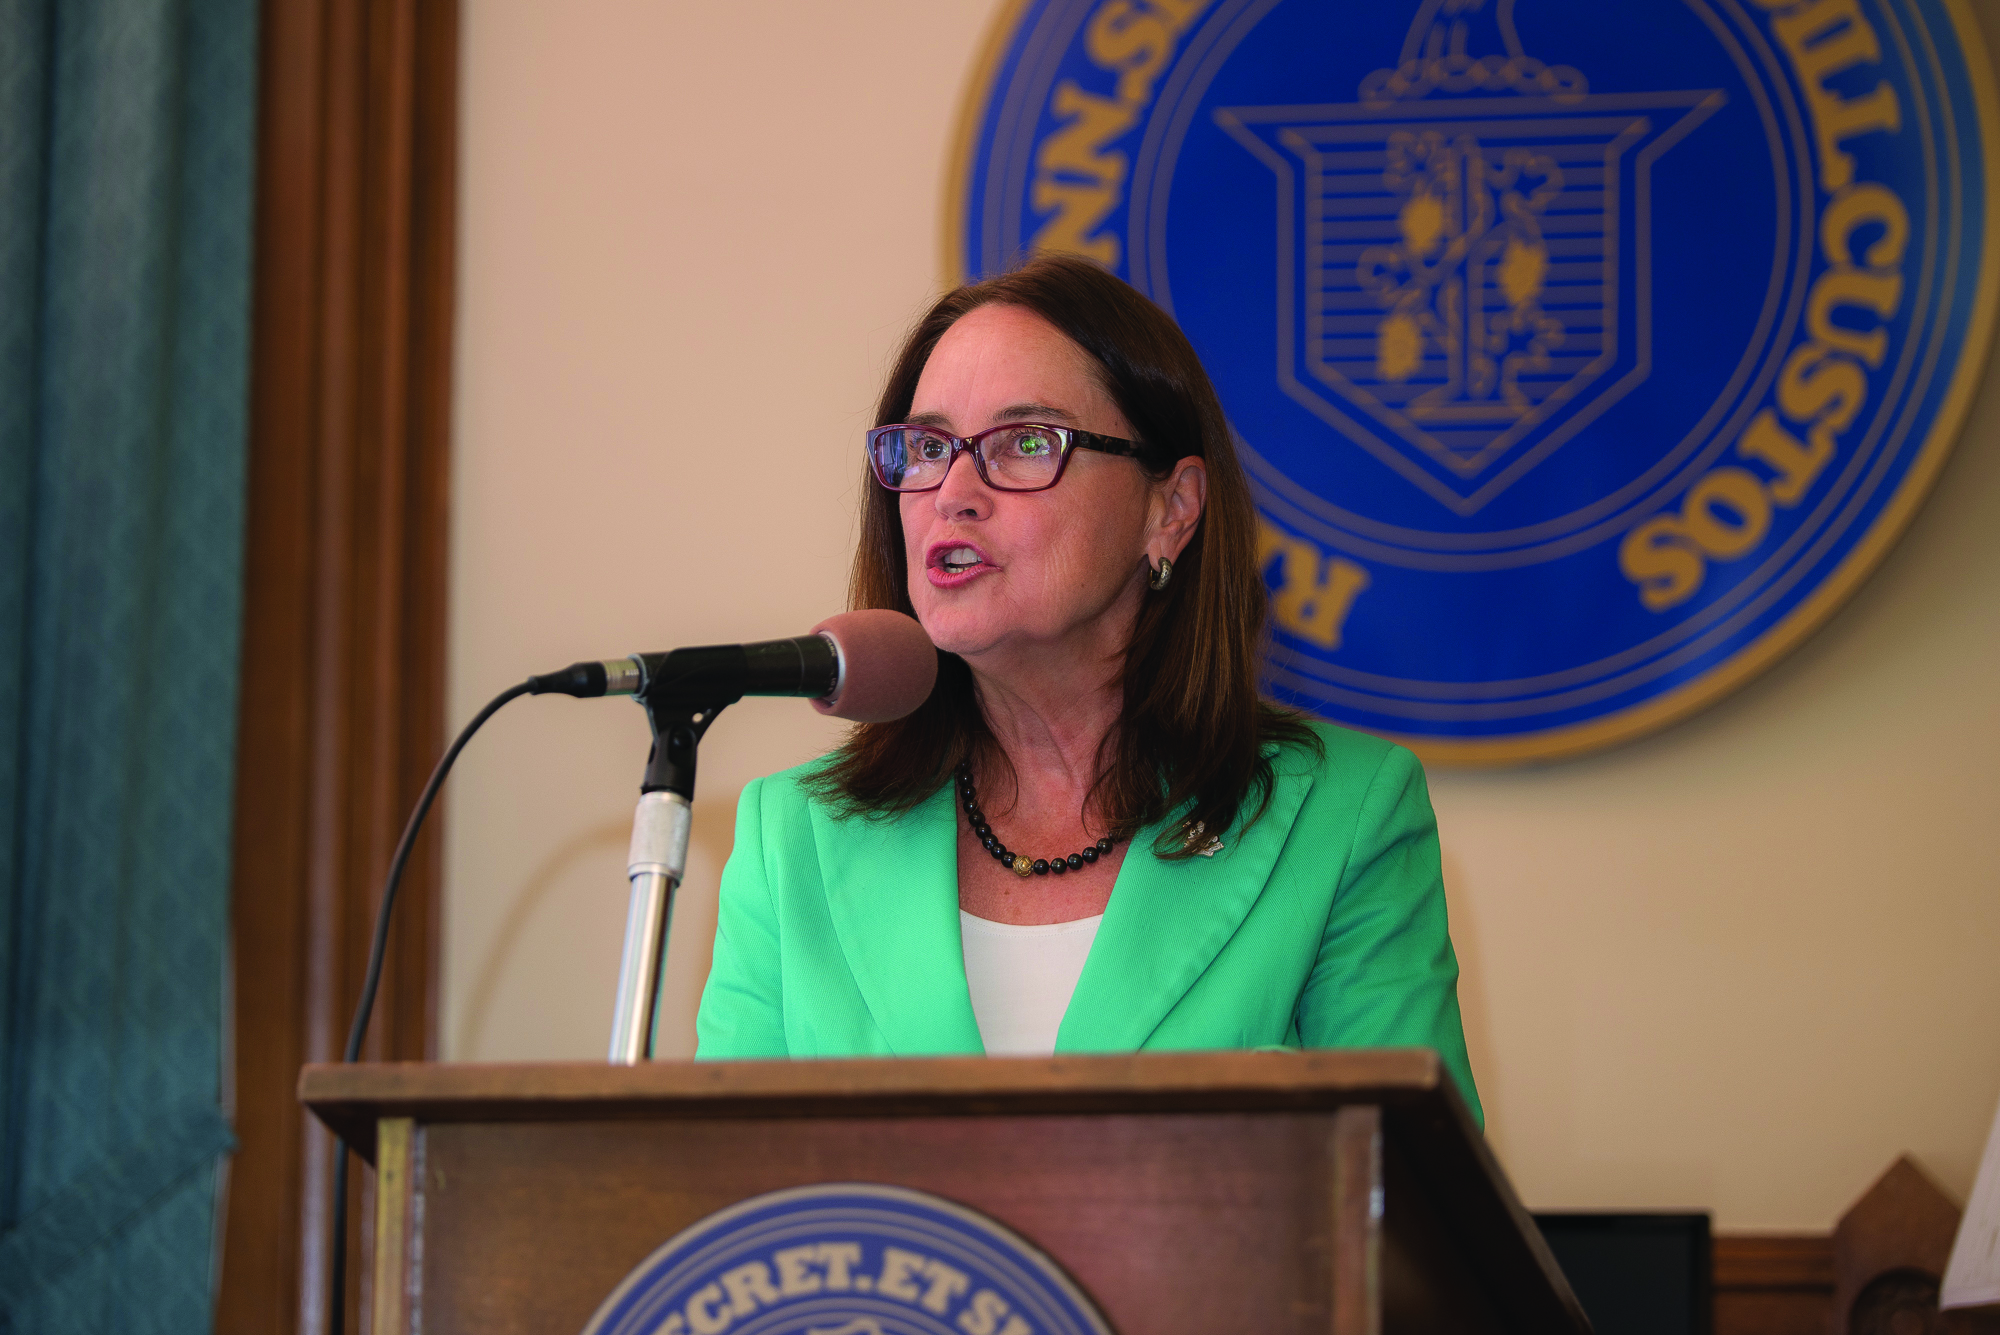 Secretary of the State Denise Merrill addresses the media at a September 2015 press conference announcing the partnership with the School of Business to deliver mandated training to the State’s 338 Registrars of Voters.